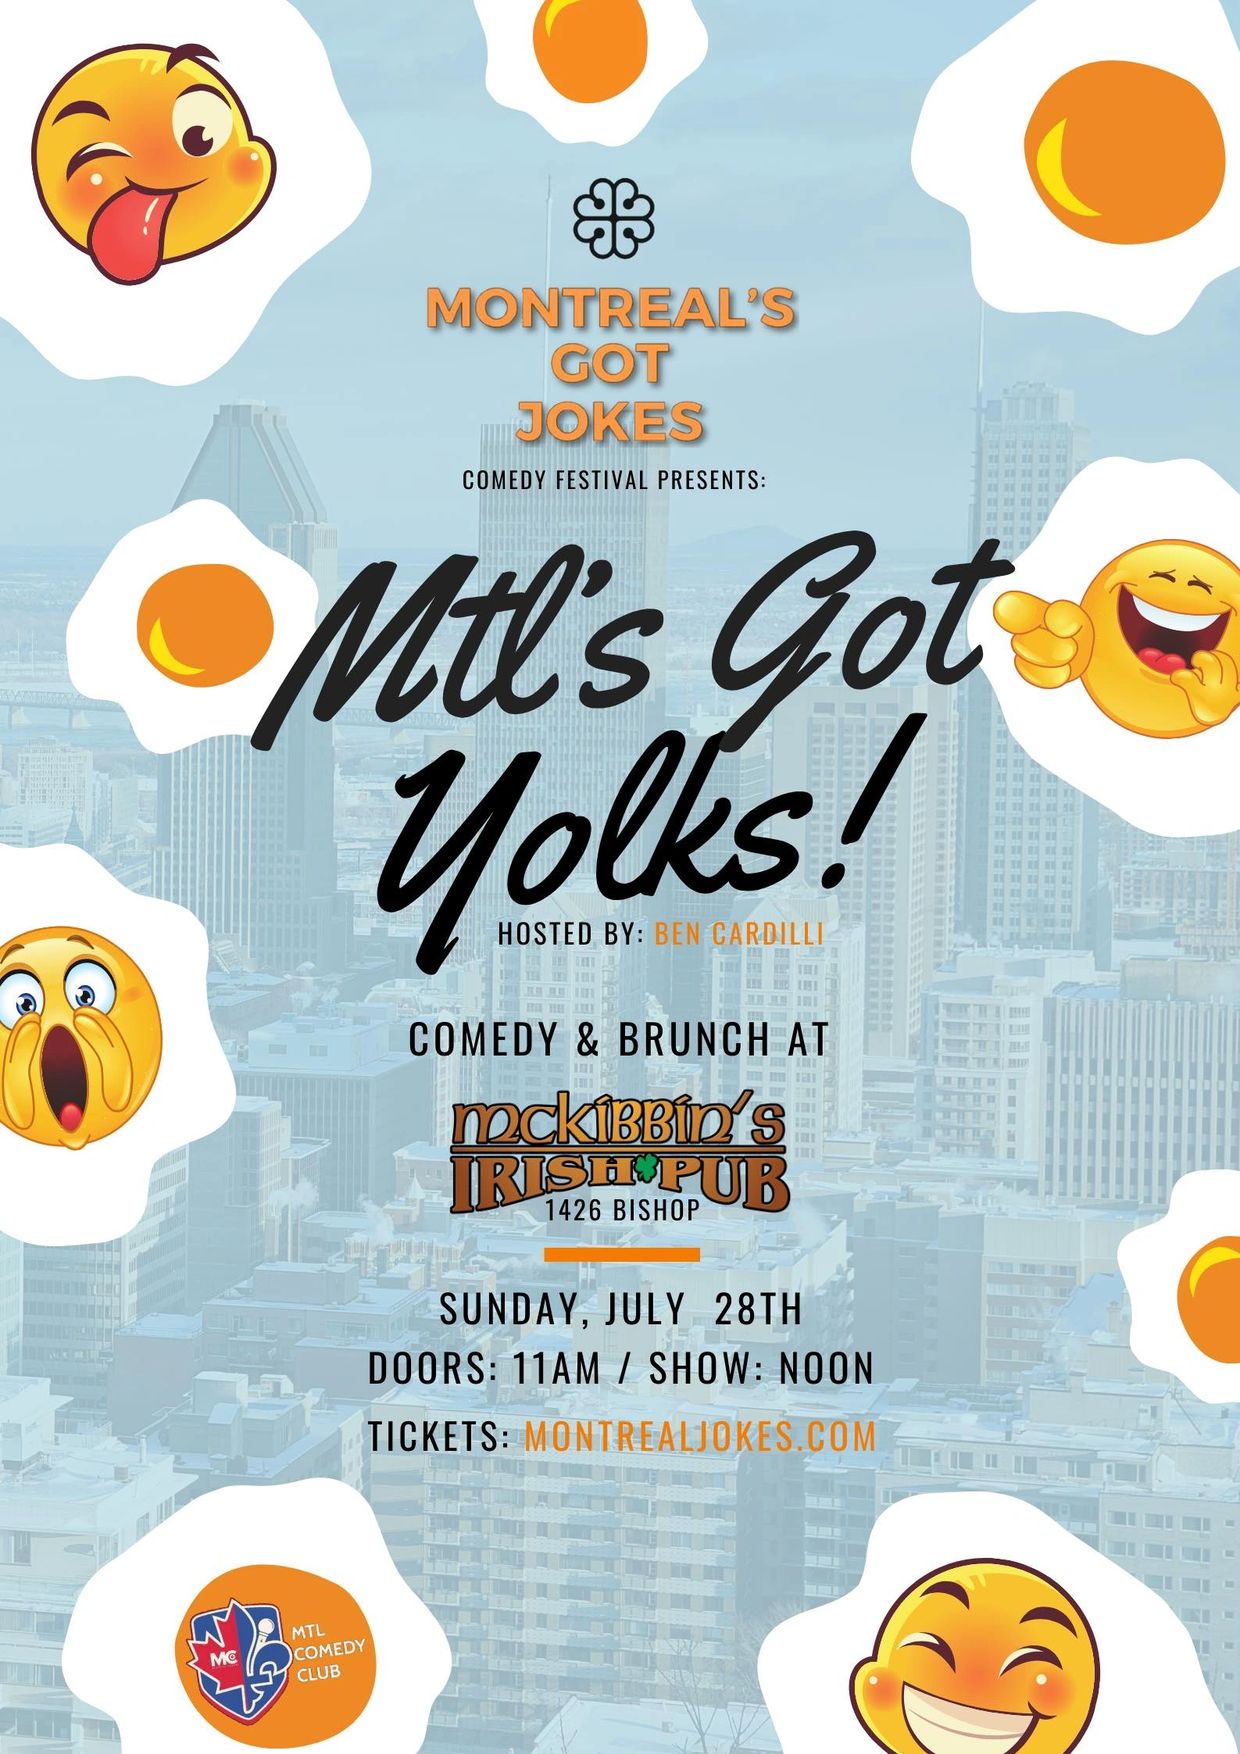 Some of MTL’s top joke slingers will be getting up early (for them) to help kickstart your Sunday.